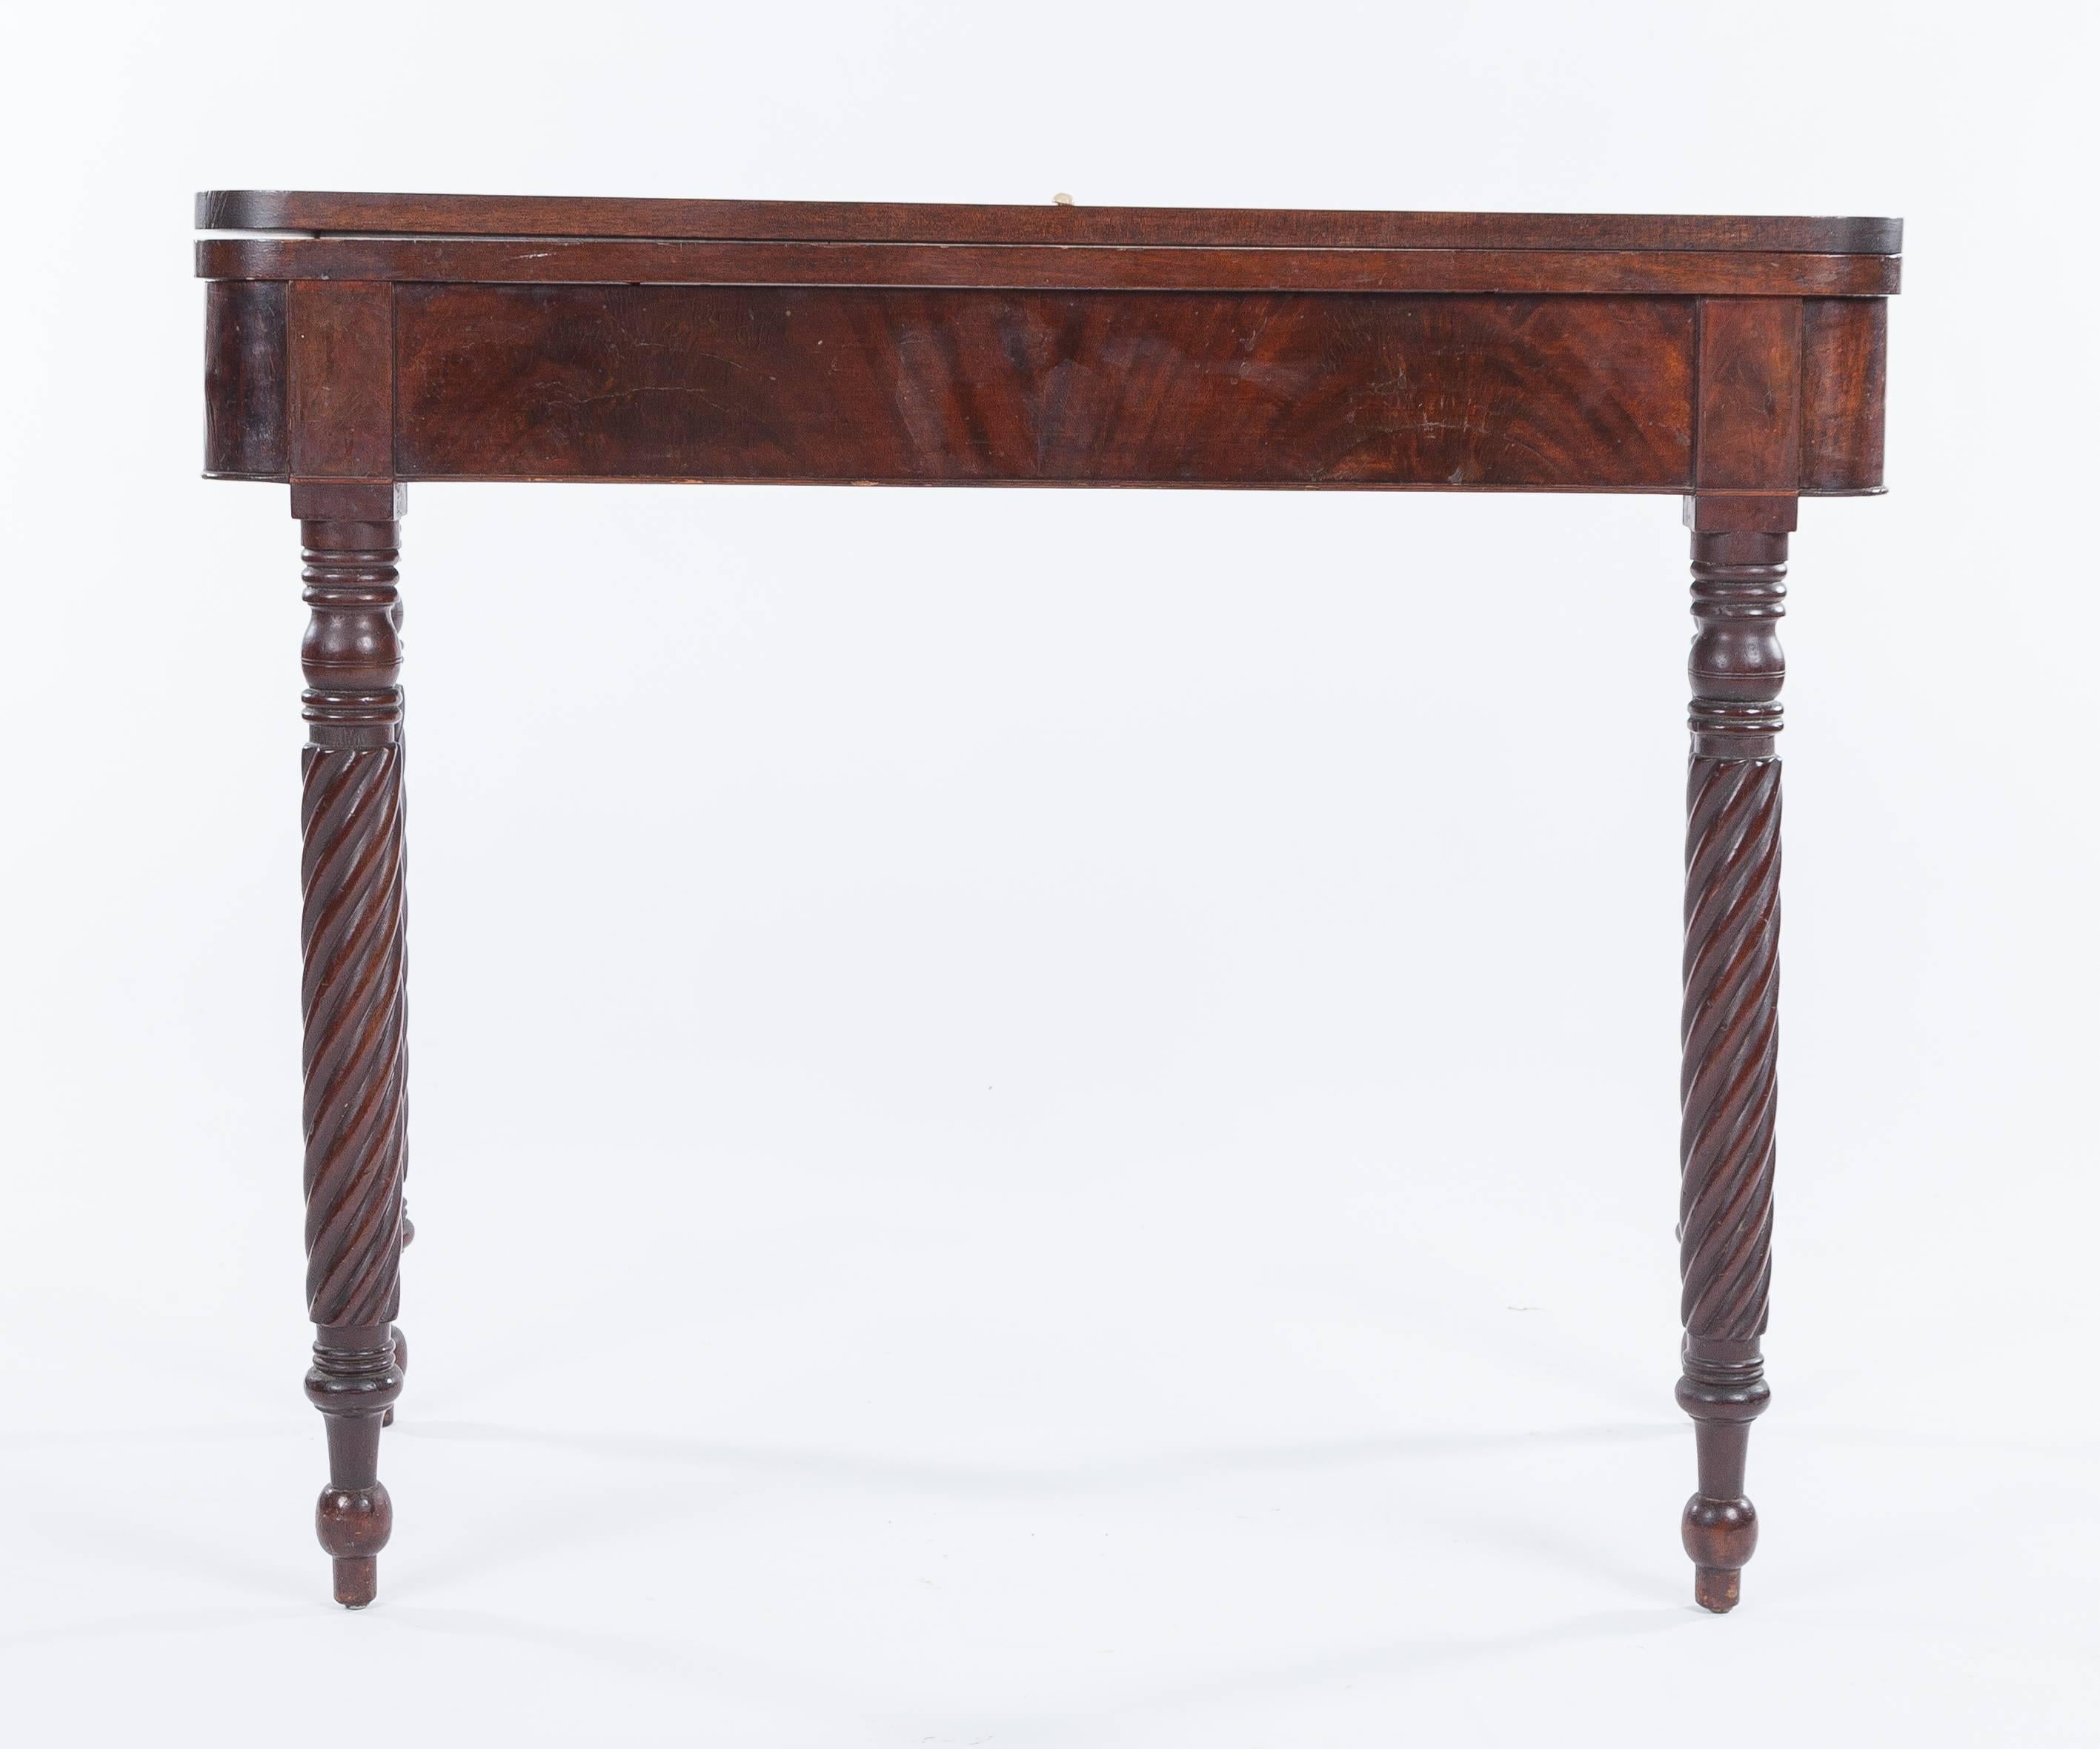 An American Sheraton card table dating to circa 1840. Made of mahogany and featuring spiral turned legs. The card table measures approximately 36